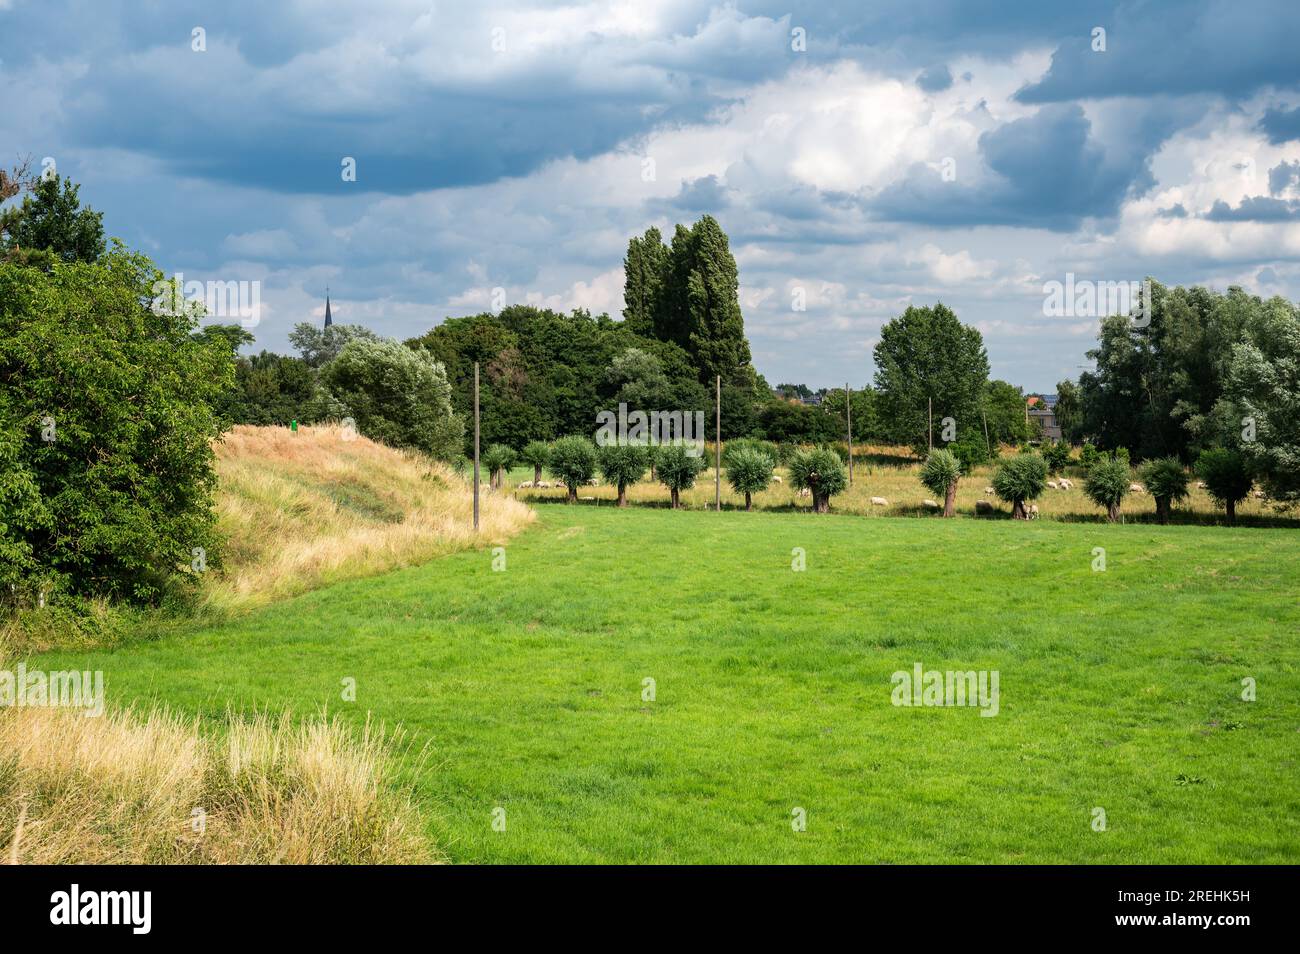 Green meadows, golden grass and trees against rainy clouds at the Flemish countryside around Schelle, Antwerp, Belgium Stock Photo